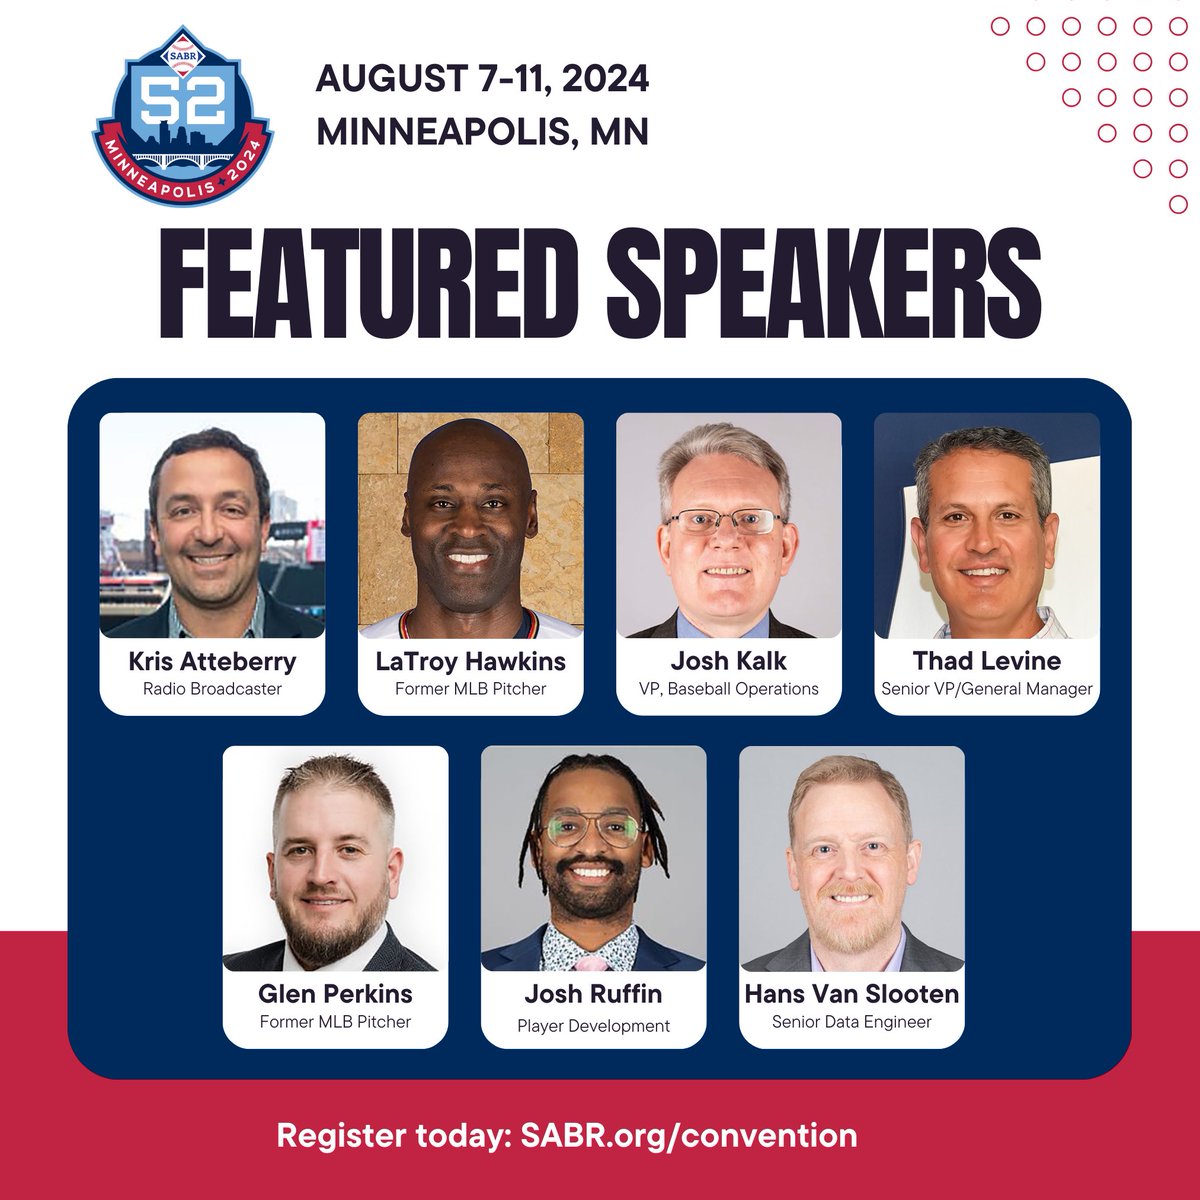 At #SABR52 in Minneapolis, we’re excited to hear from @Twins GM Thad Levine, @glenperkins and @LaTroyHawkins32, plus @cantpitch, Josh Kalk, Josh Ruffin, and Kris Atteberry. Hope you’ll join us! sabr.org/latest/sabr-52…